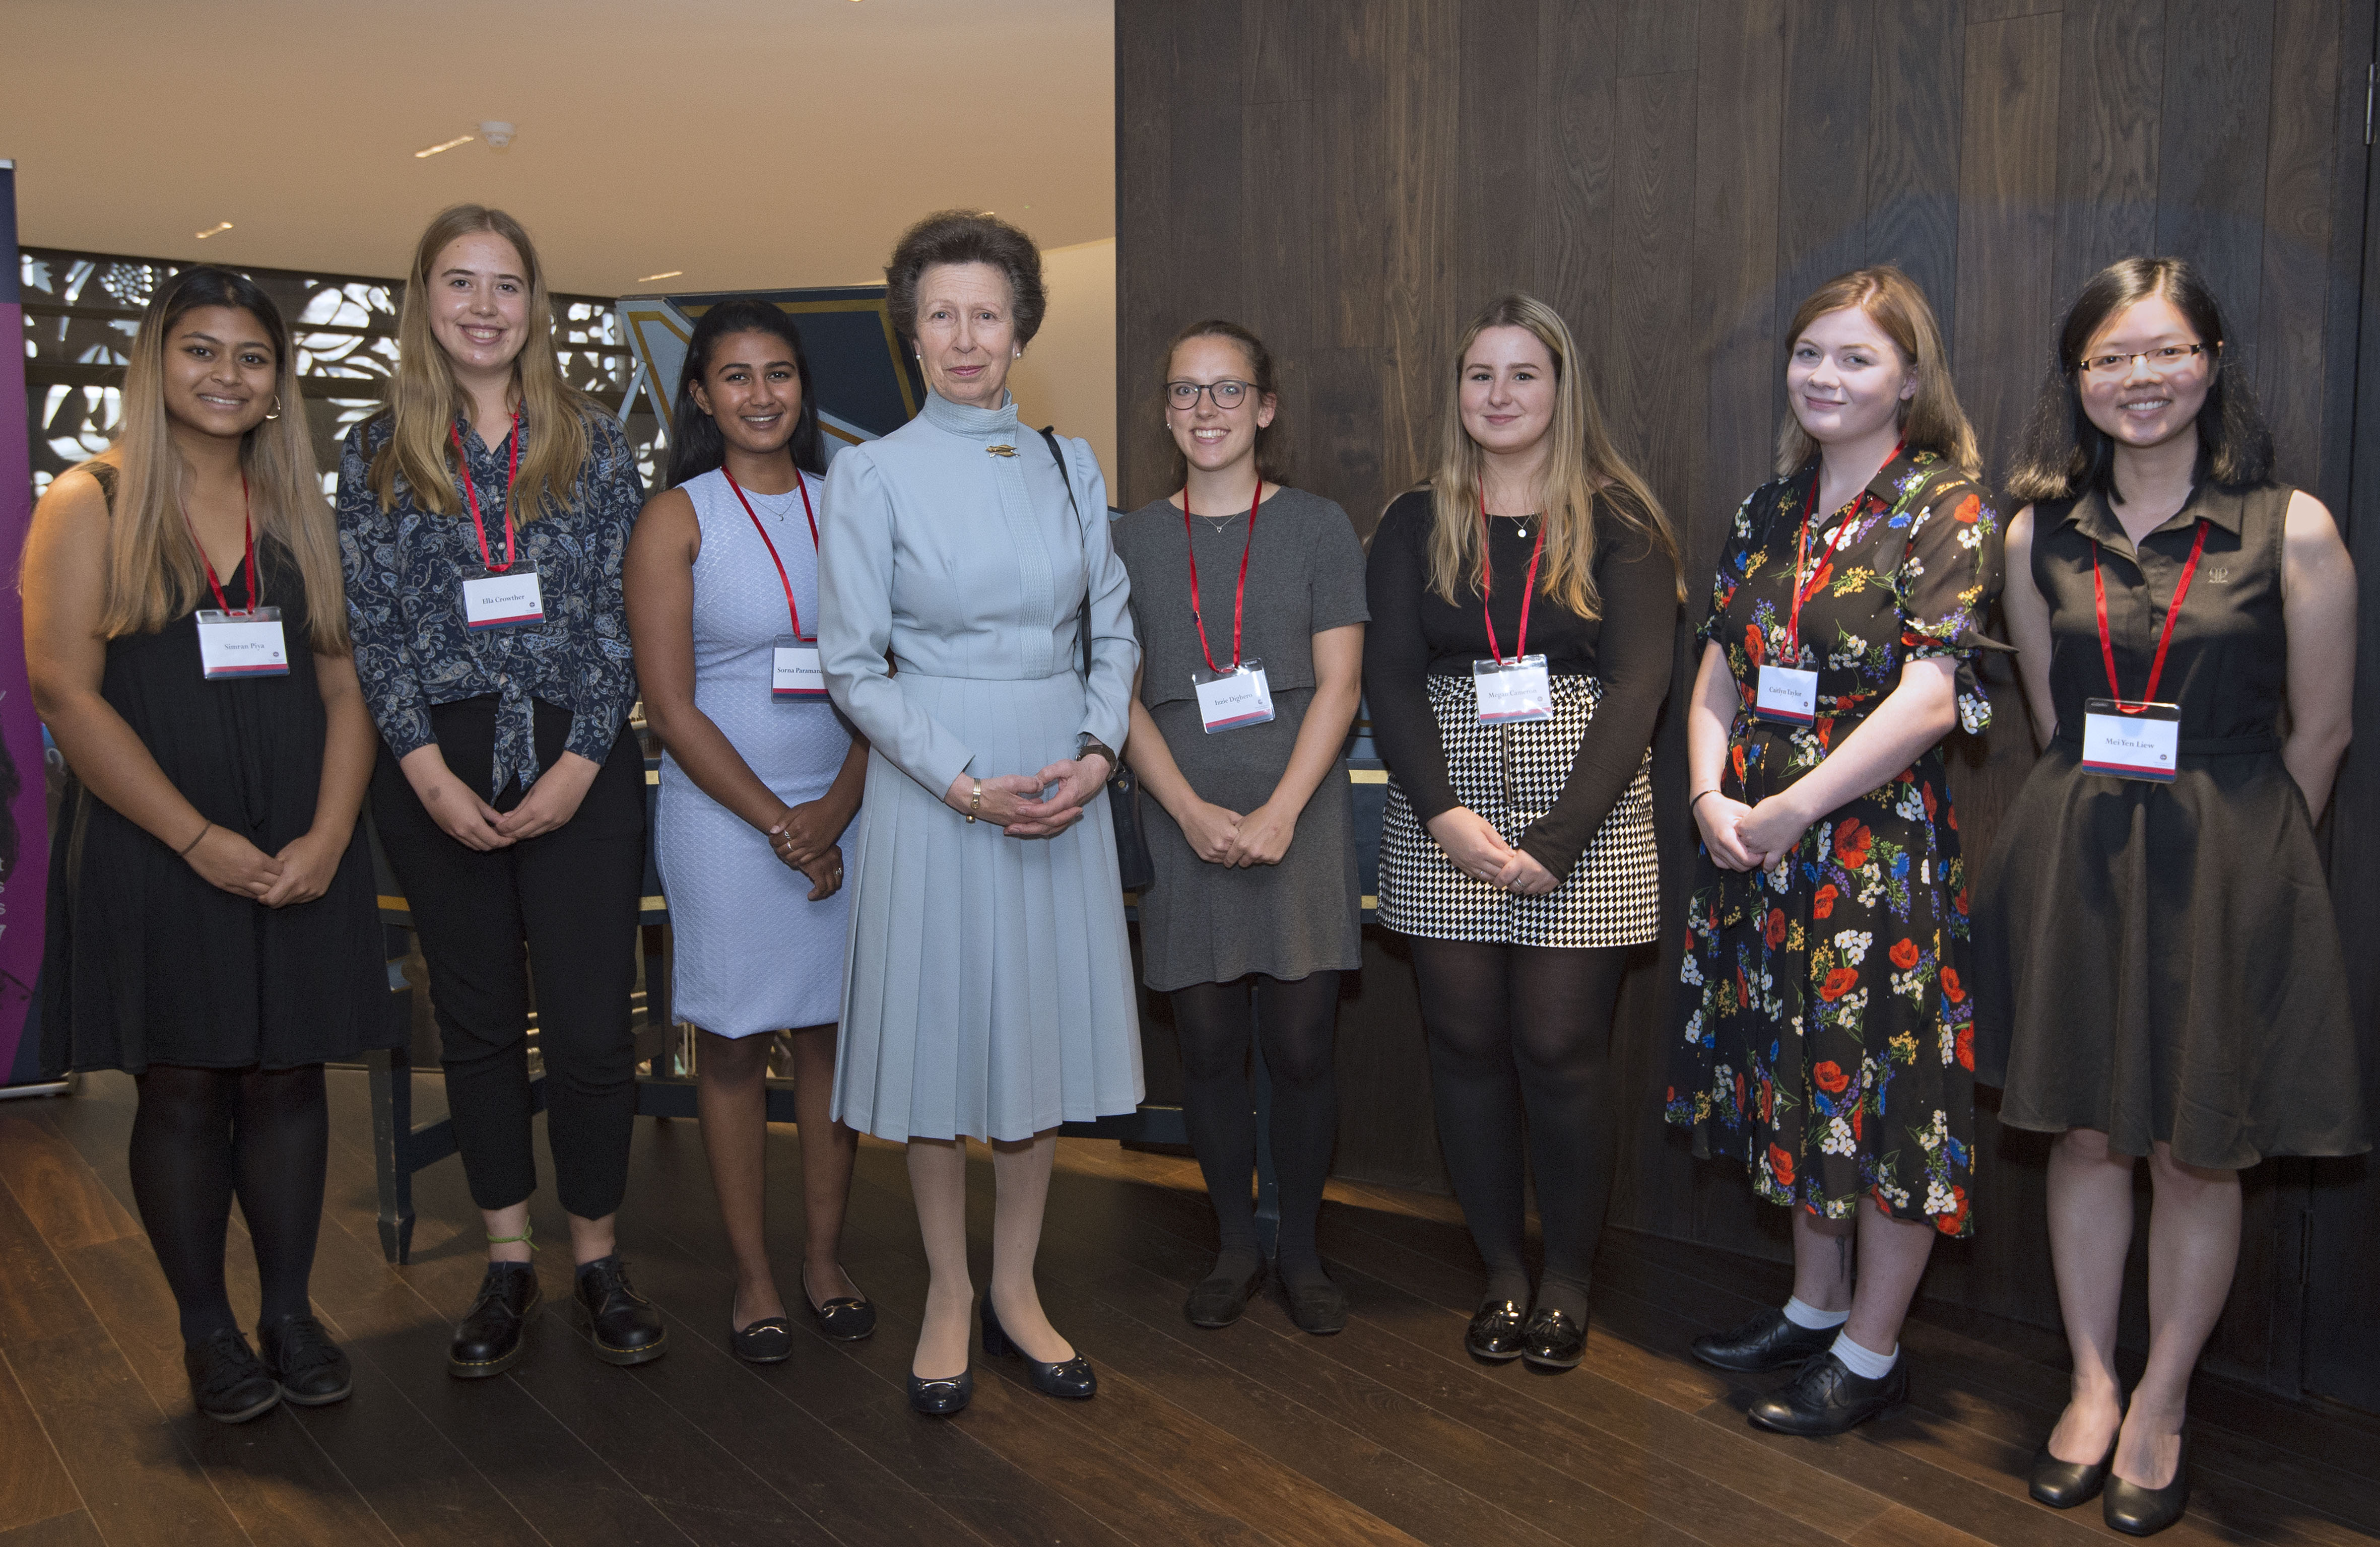 The Princess Royal meets Edinburgh Medical School students who collected the honorary posthumous degrees for the Edinburgh Seven